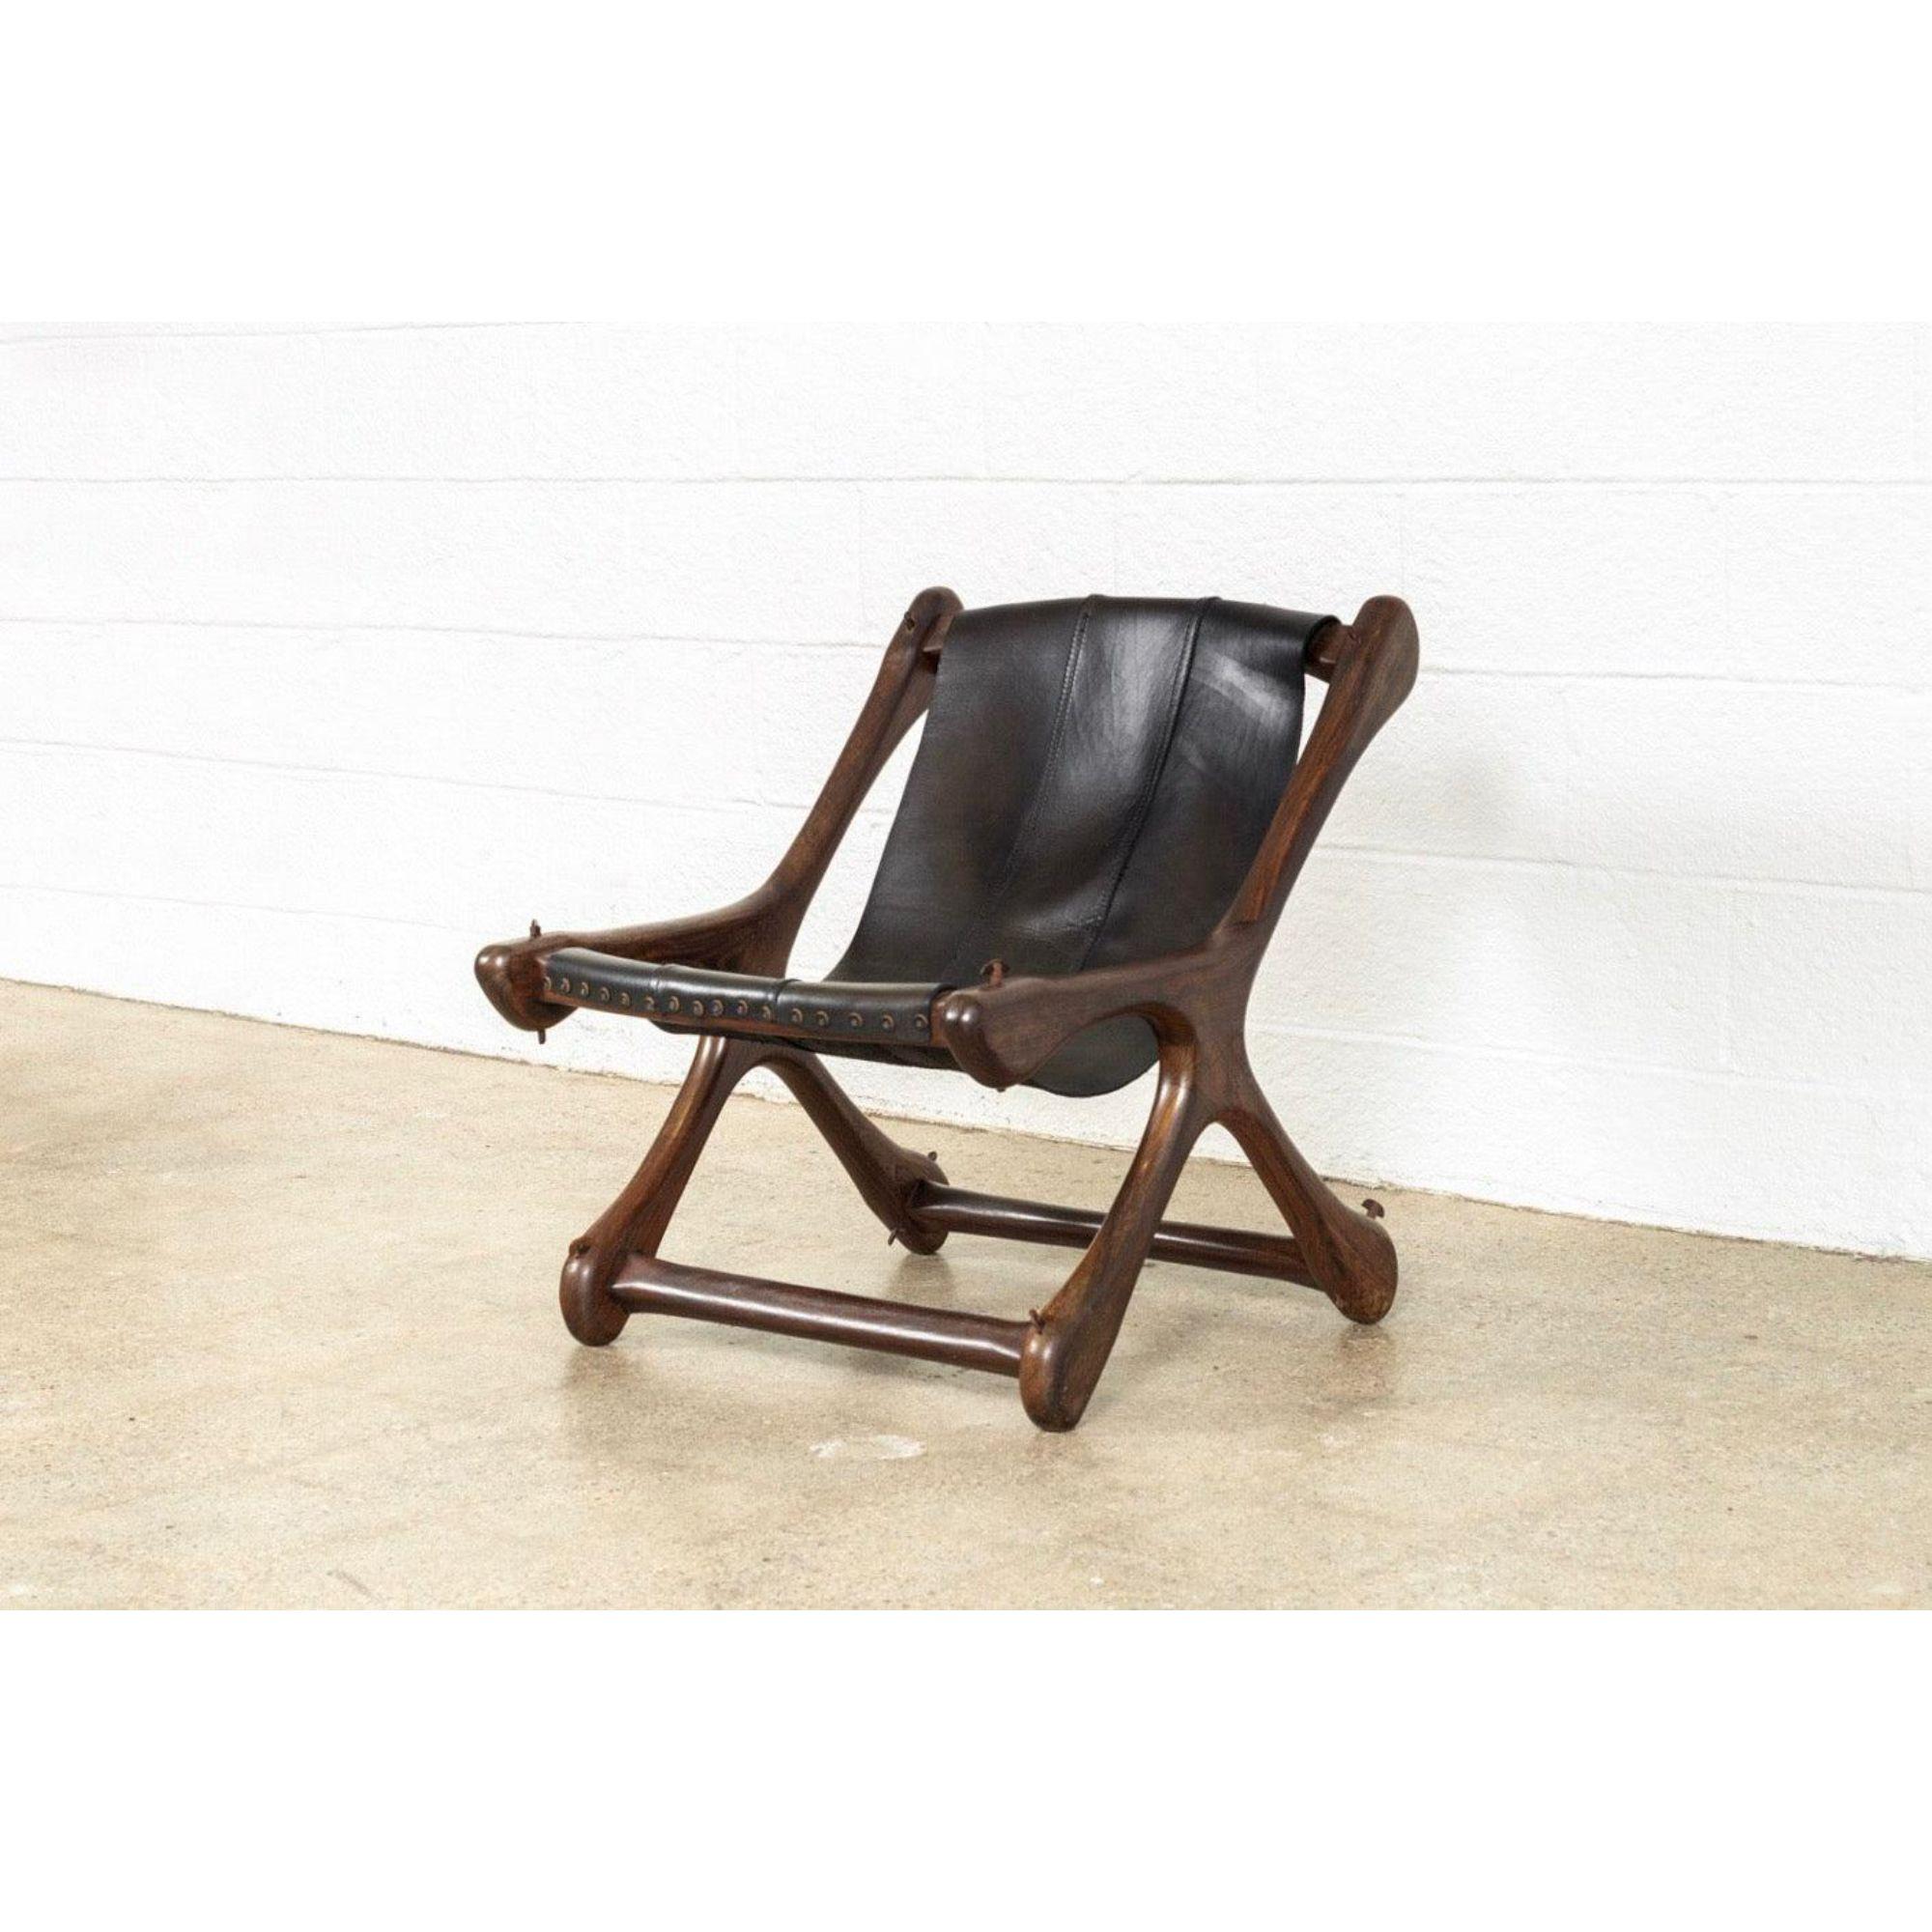 Mid-Century Modern Midcentury Lounge Chair in Rosewood & Leather by Don Shoemaker, 1960s For Sale